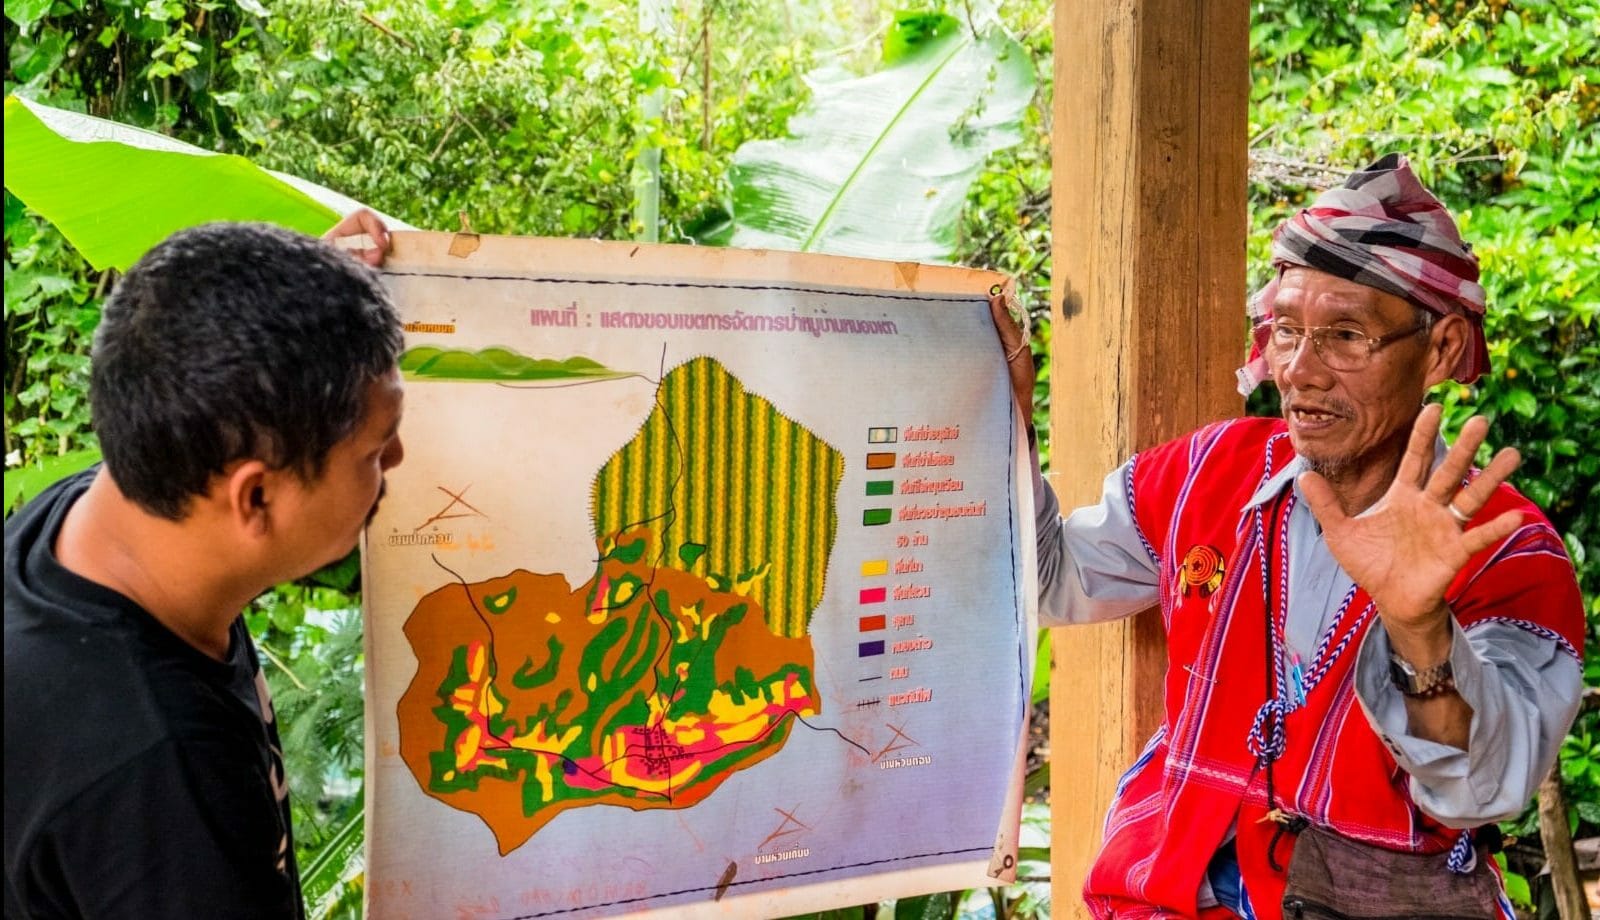 As Thailand works to mitigate carbon emissions, new forest conservation and land laws threaten to push the Ban Nong Tao communities off of their land.